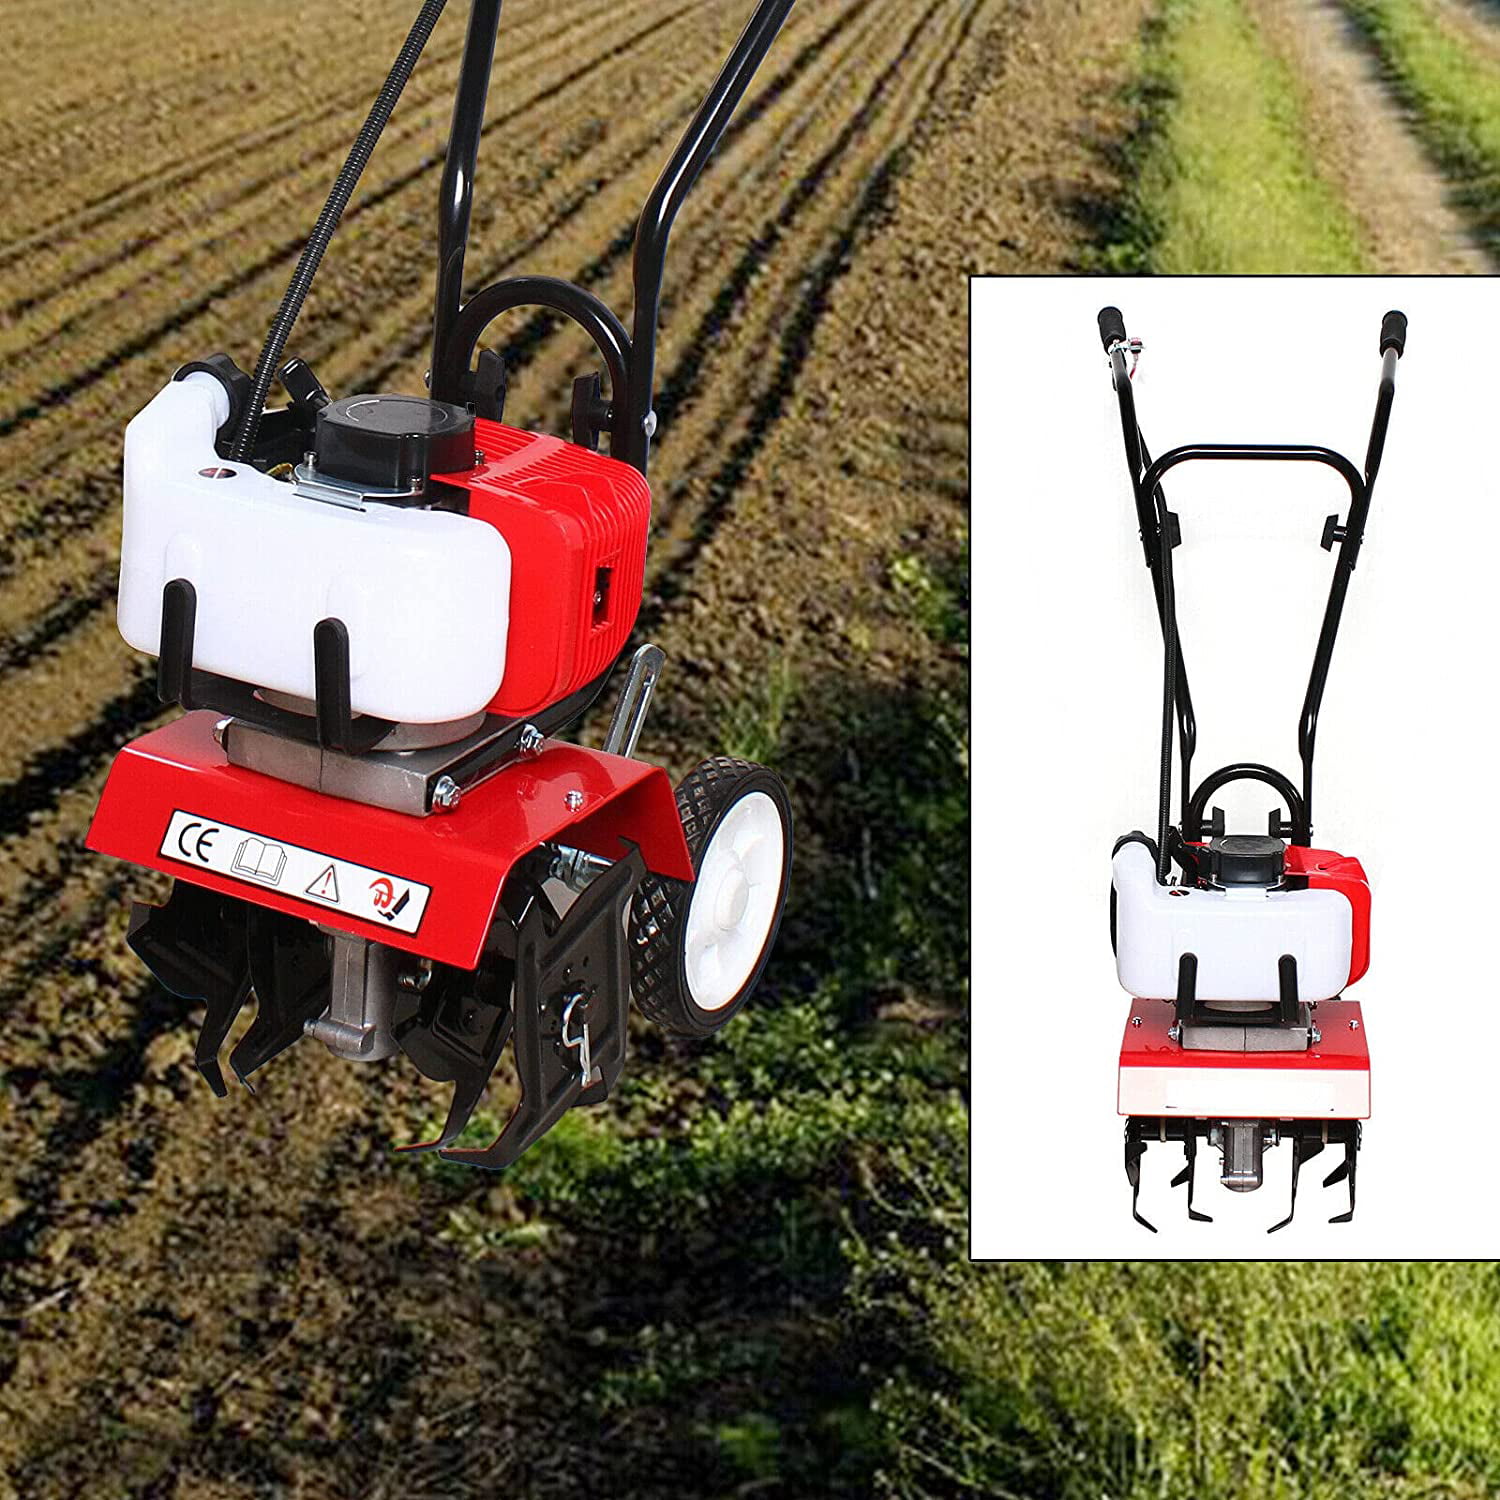 Mini Tiller Cultivator,52cc 2 Stroke Gas Motor Gas Powered Cultivator 4 Premium Steel Adjustable Rotating Tines Easy to Carry Front Tine Tiller Cultivator for Garden Lawn Digging Soil 